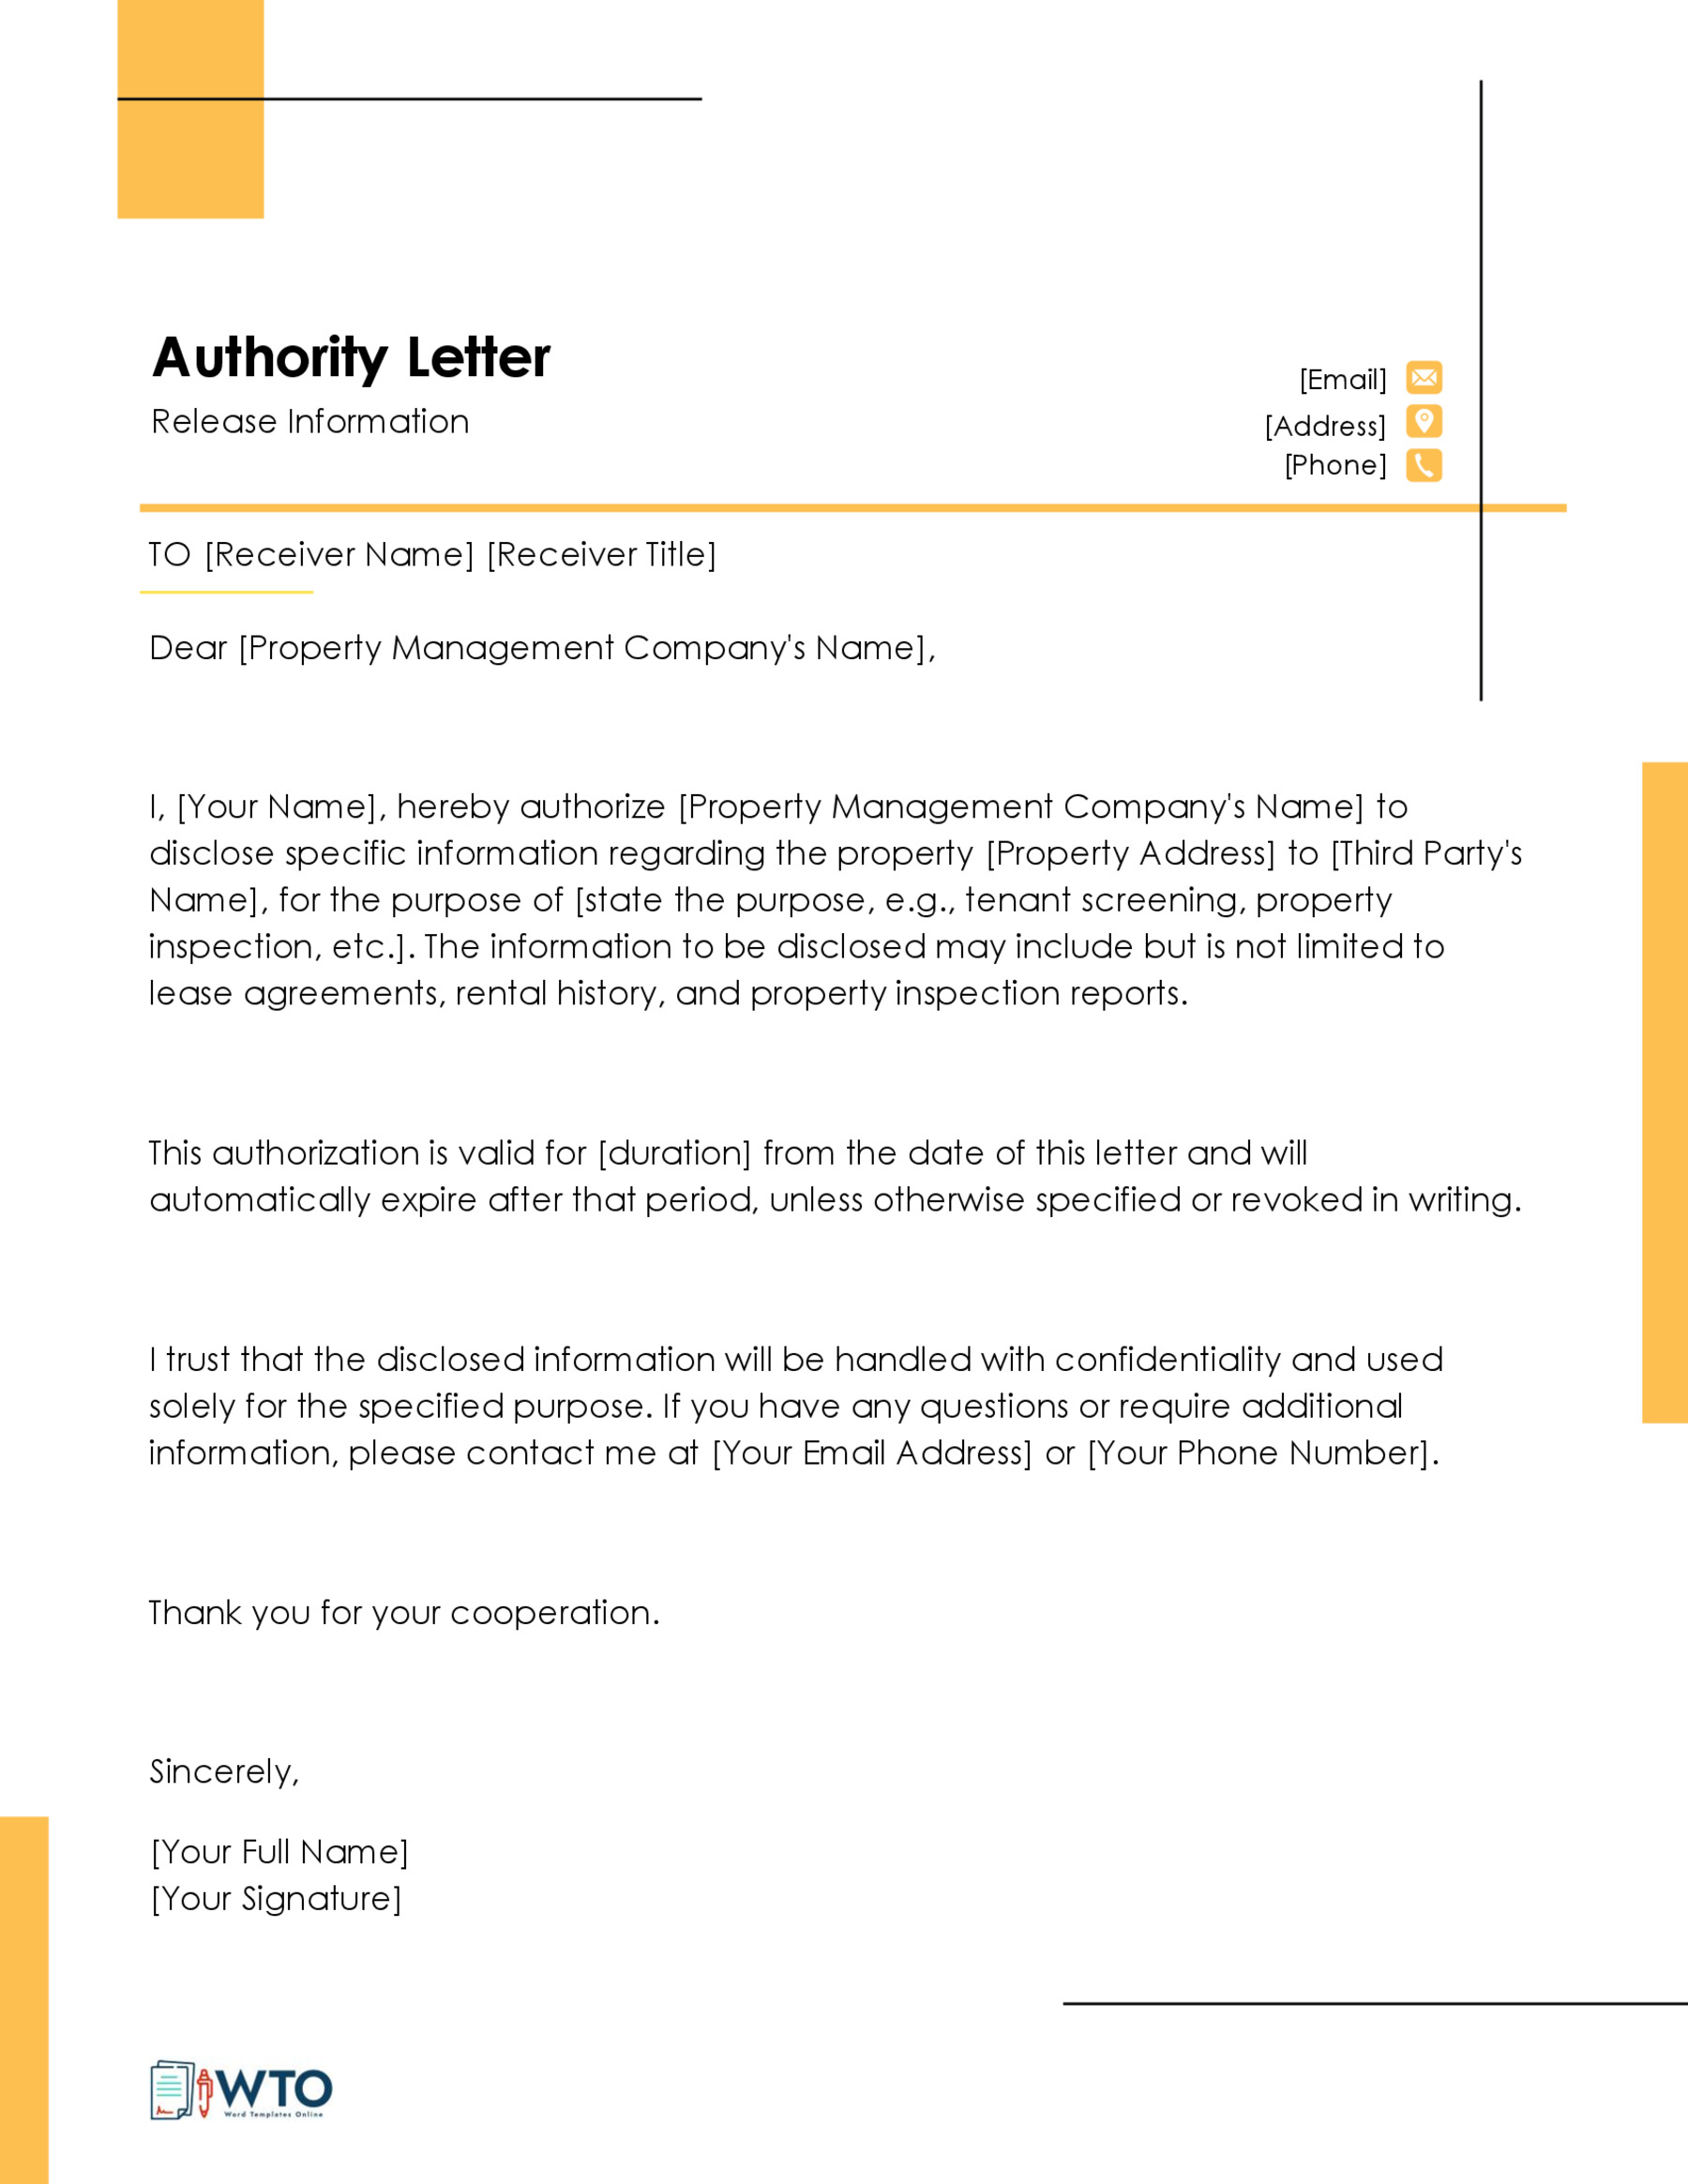 Authorization Letter to Release Information Template-Downloadable word format